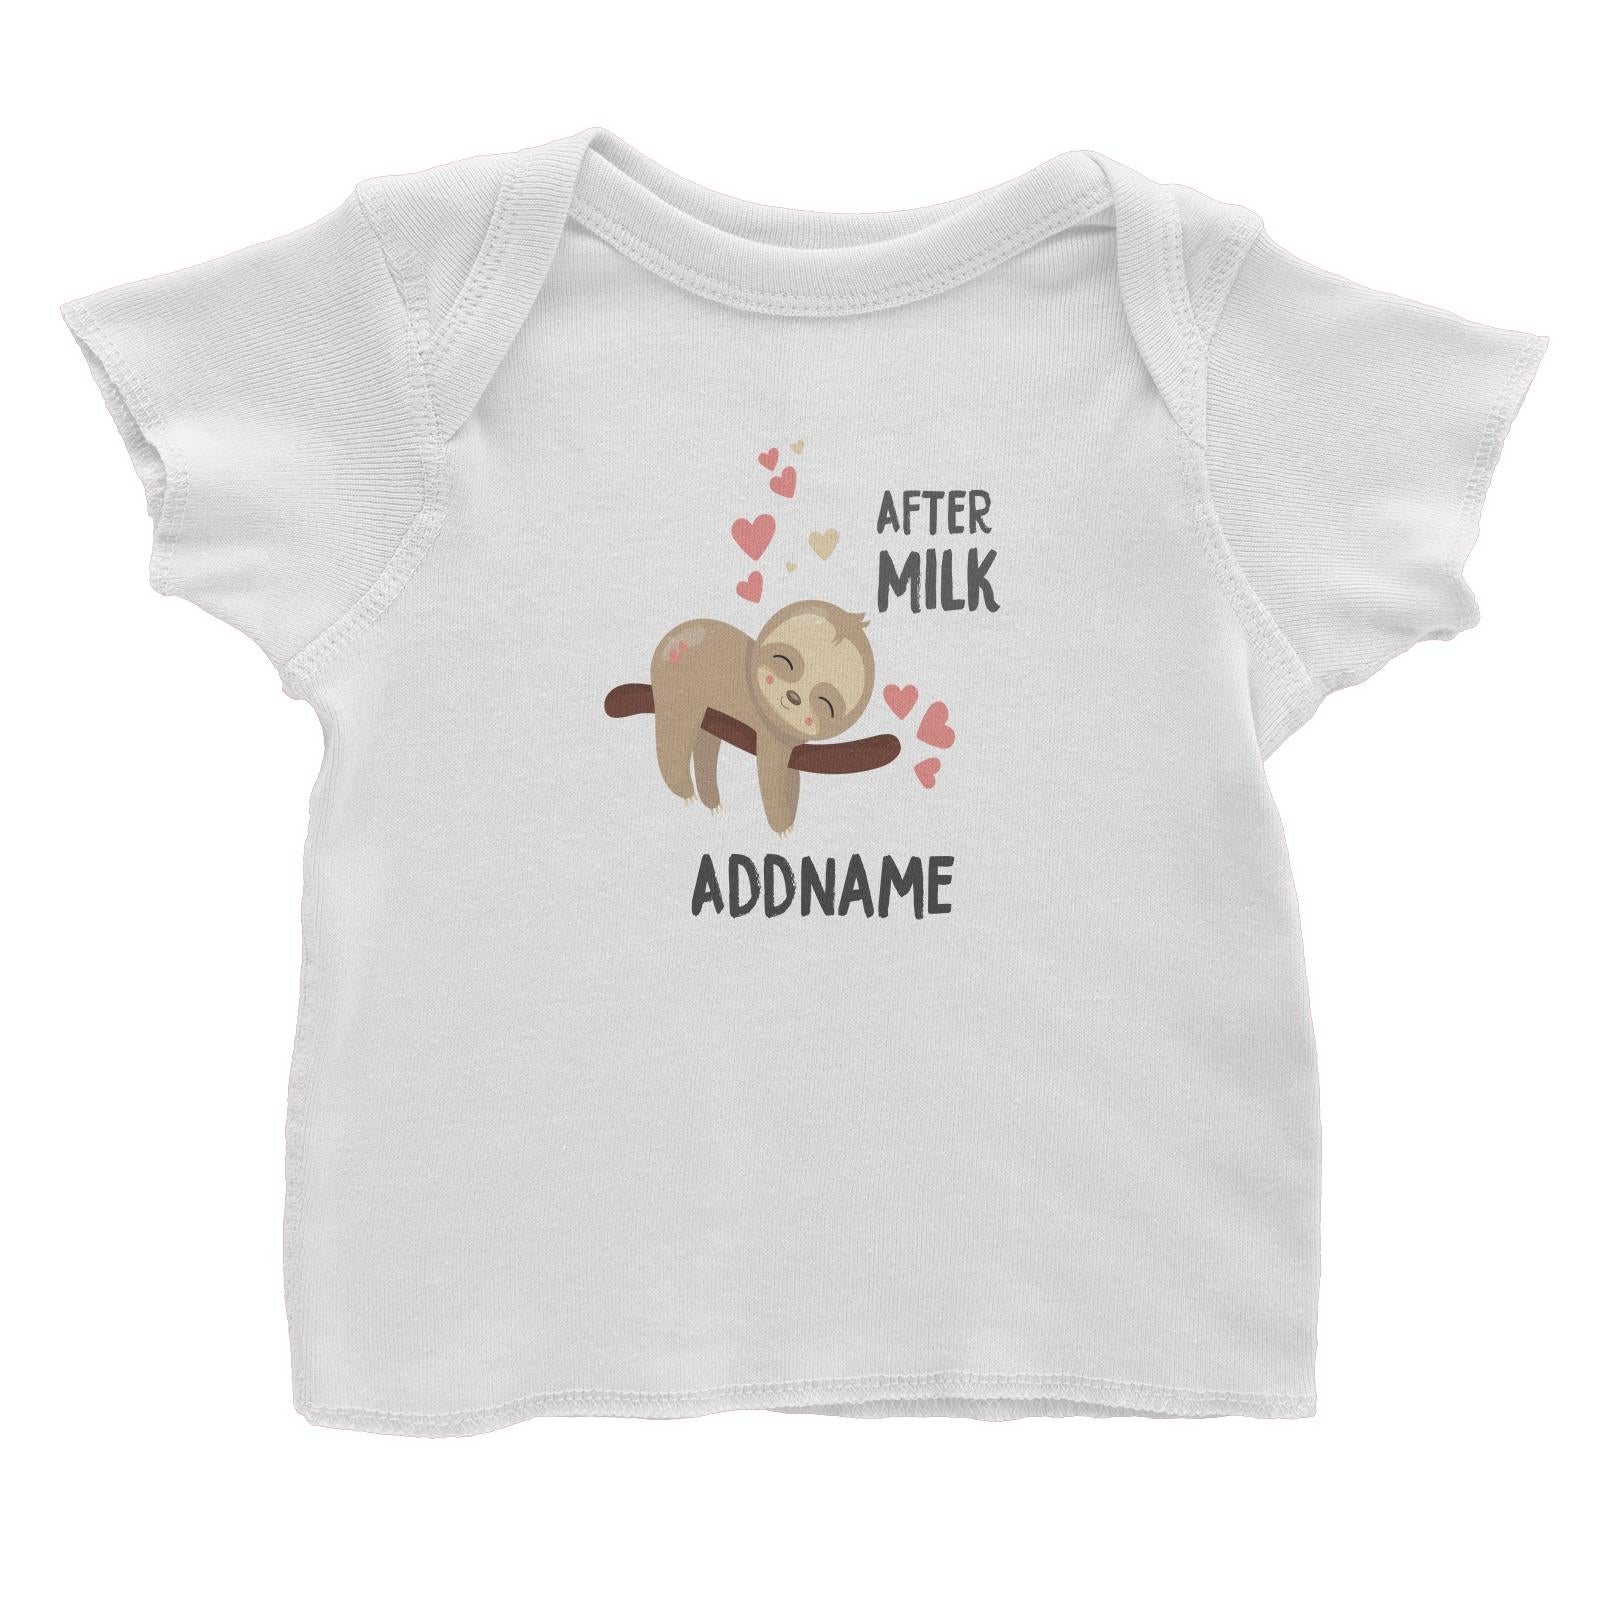 Cute Sloth After Milk Addname Baby T-Shirt